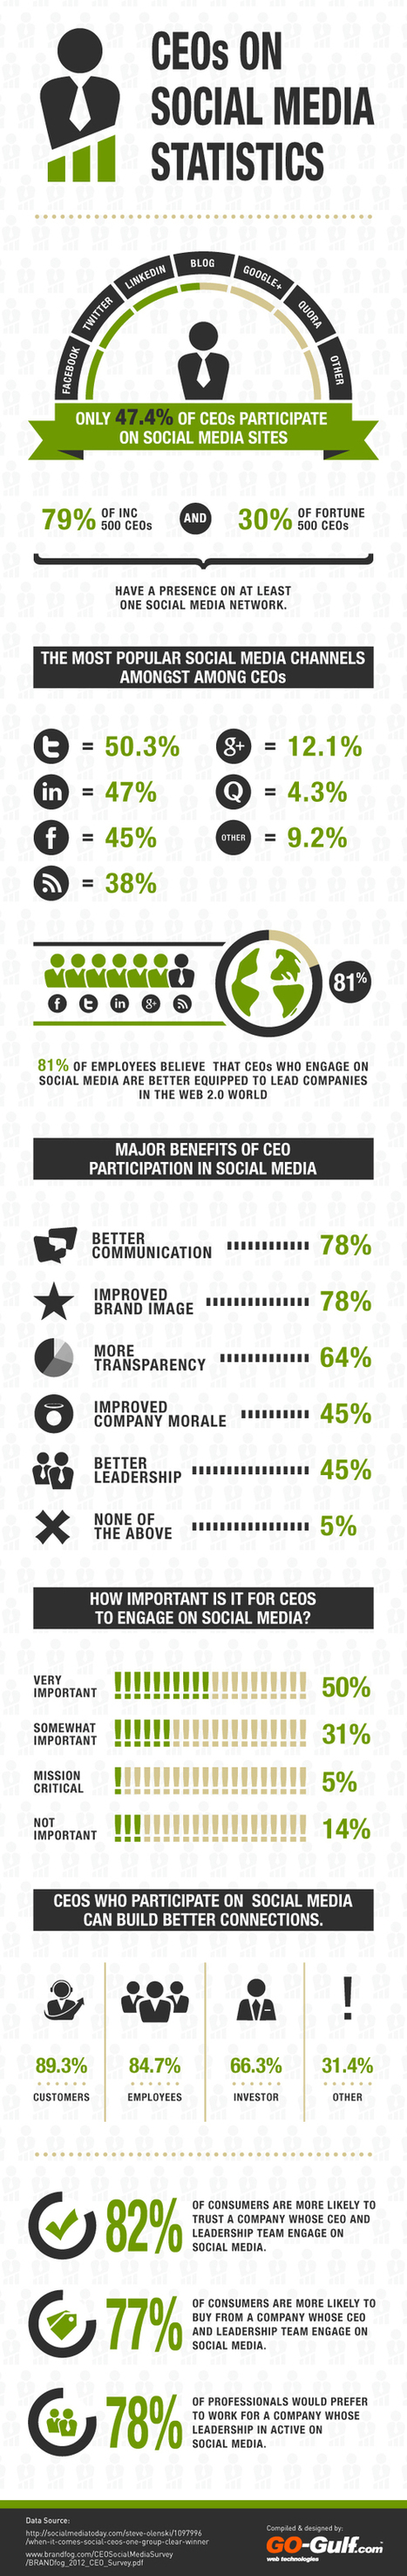 CEOs on Social Media Statistics [Infographic] | Business Improvement and Social media | Scoop.it